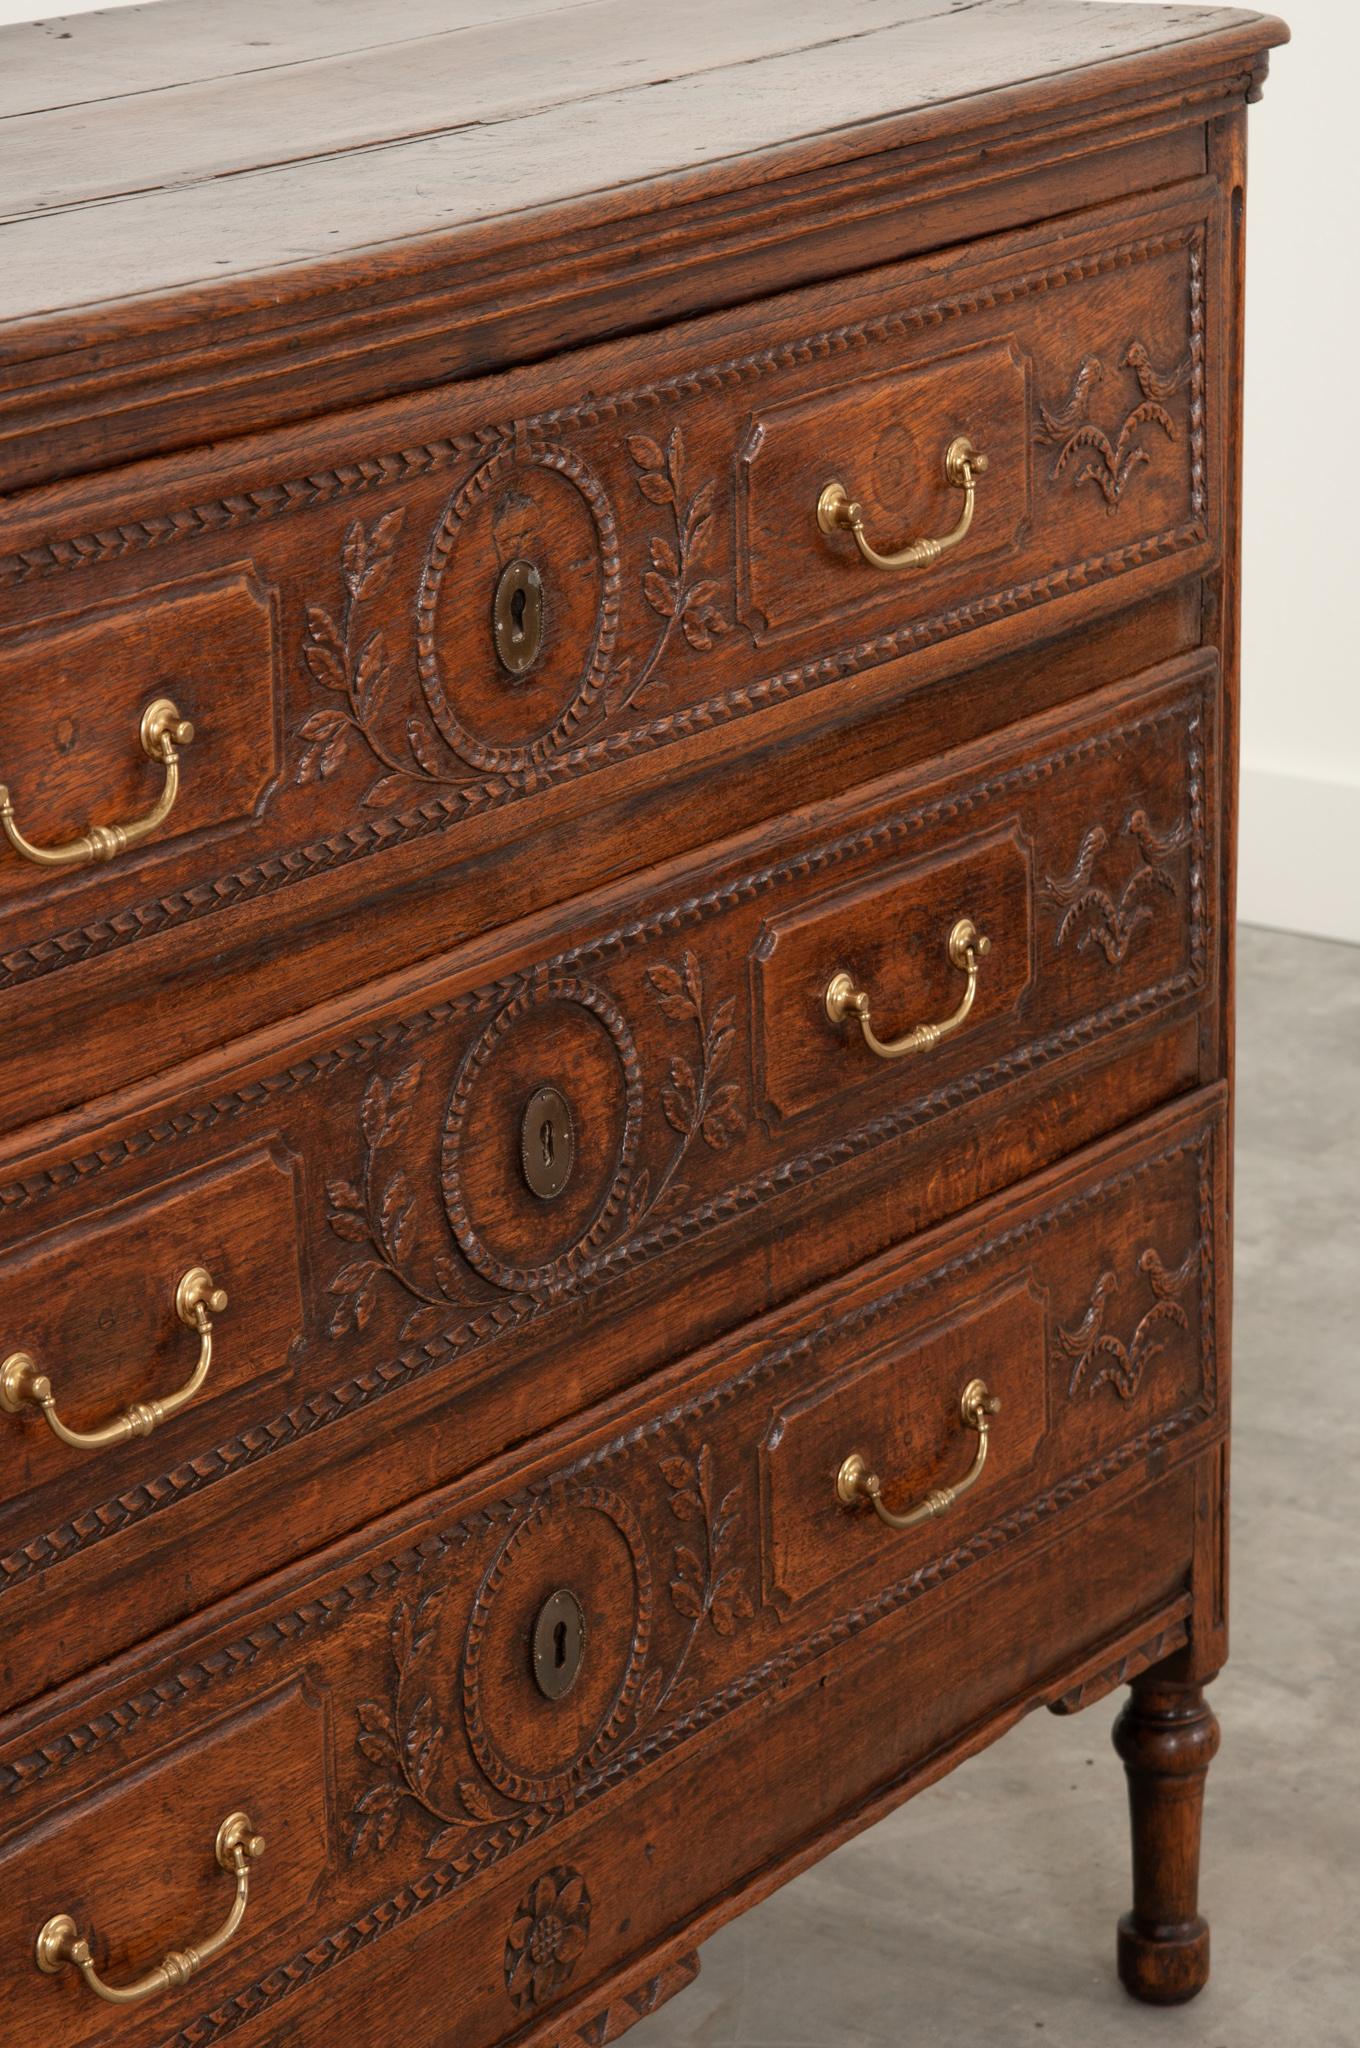 French 18th Century Carved Oak Commode In Good Condition For Sale In Baton Rouge, LA